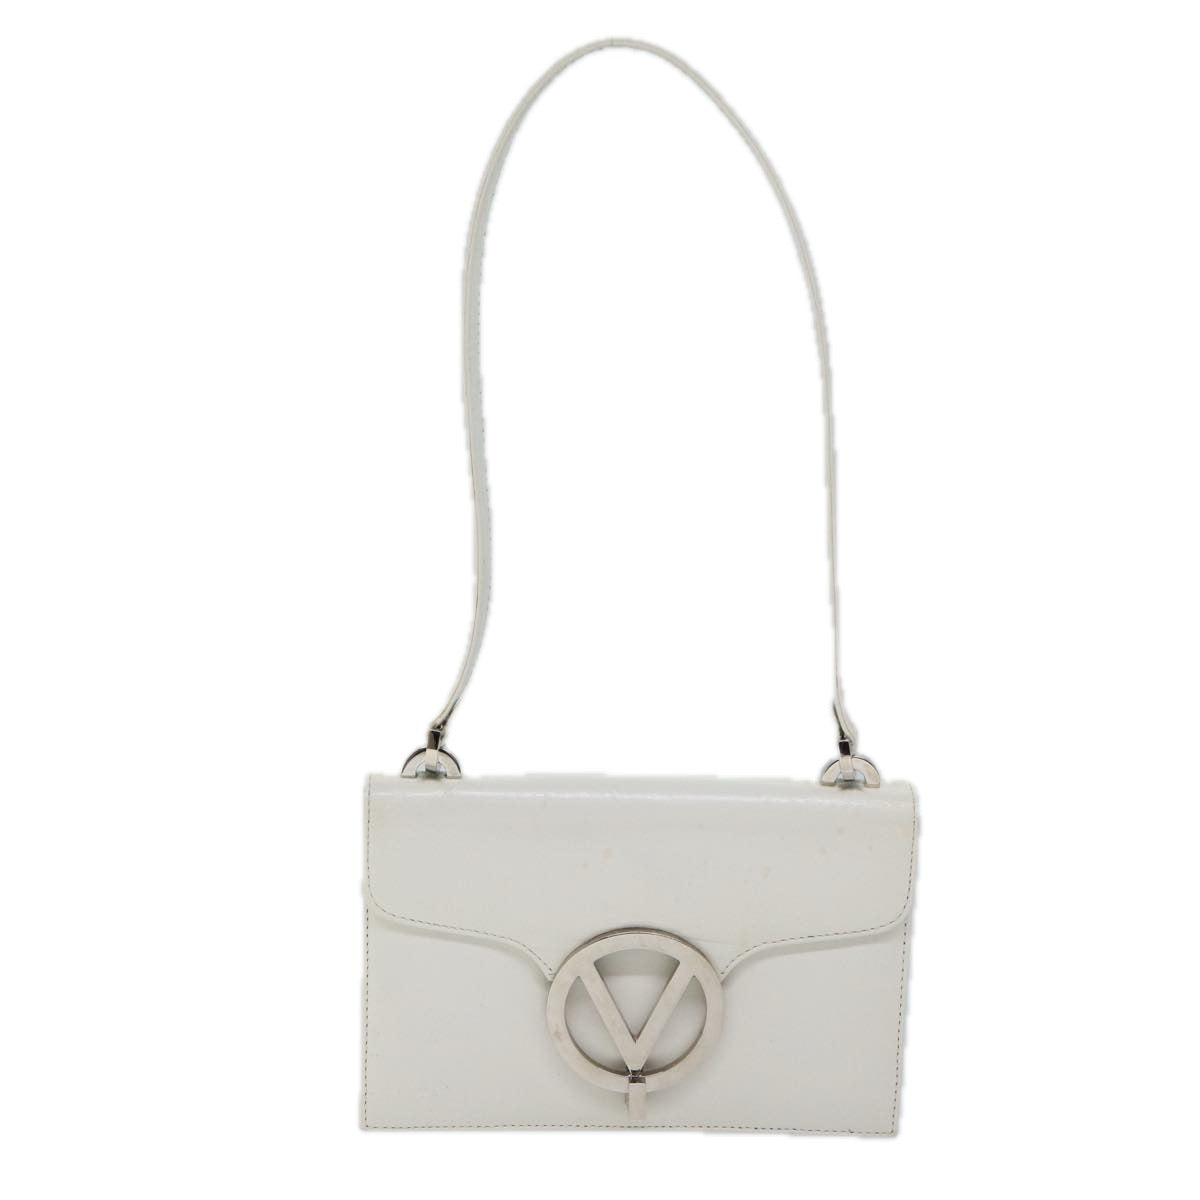 VALENTINO Shoulder Bag Leather White Auth bs13333